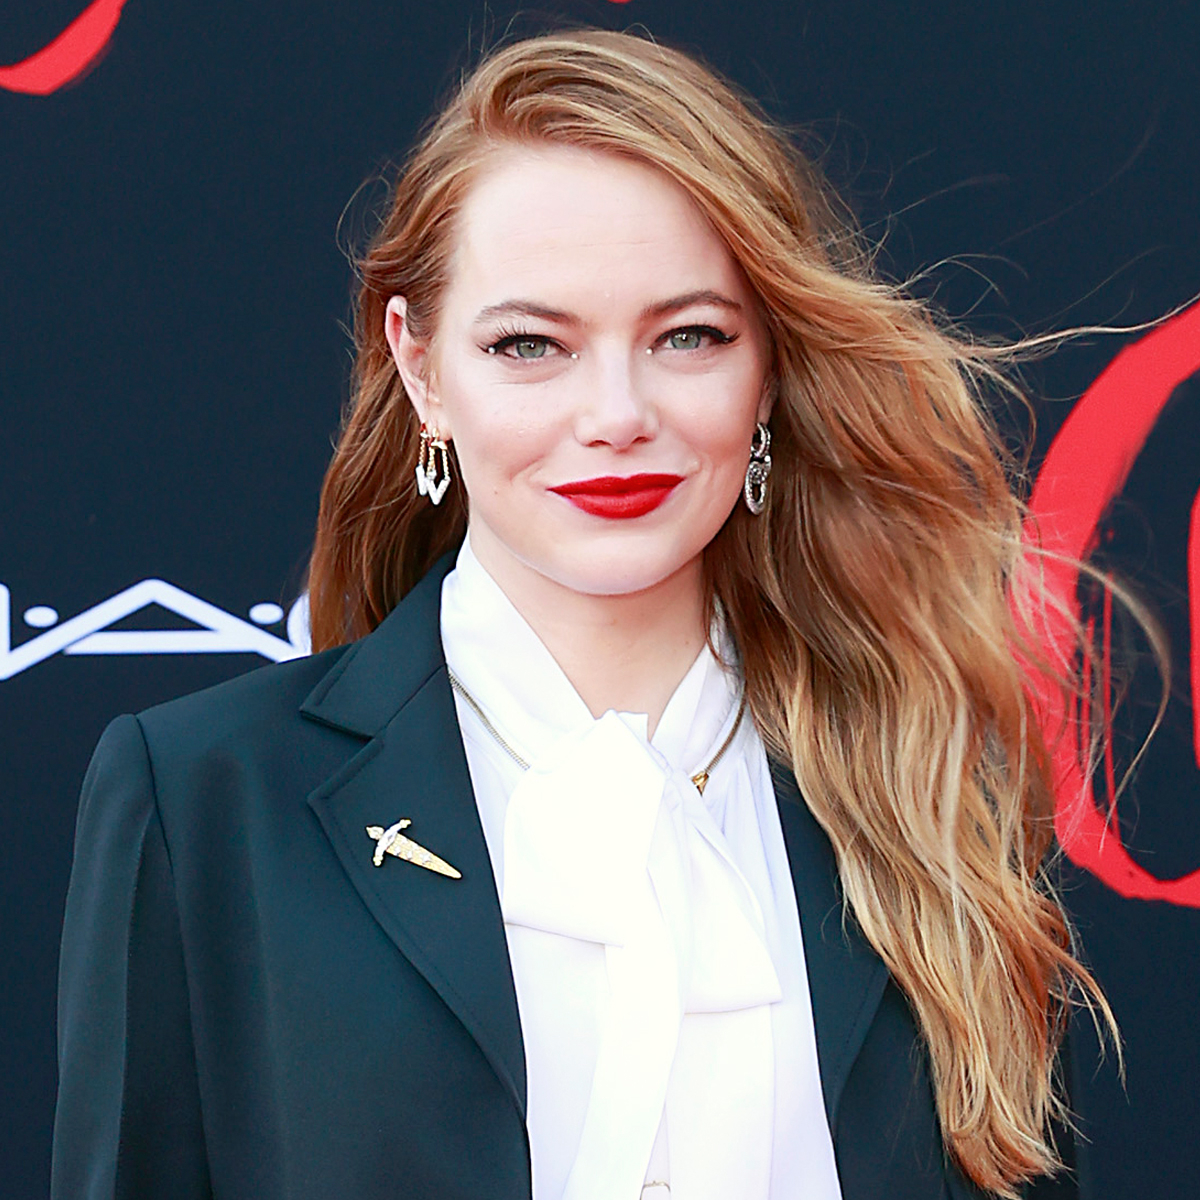 EXCLUSIVE: Emma Stone speaks about sensuality and starring in the